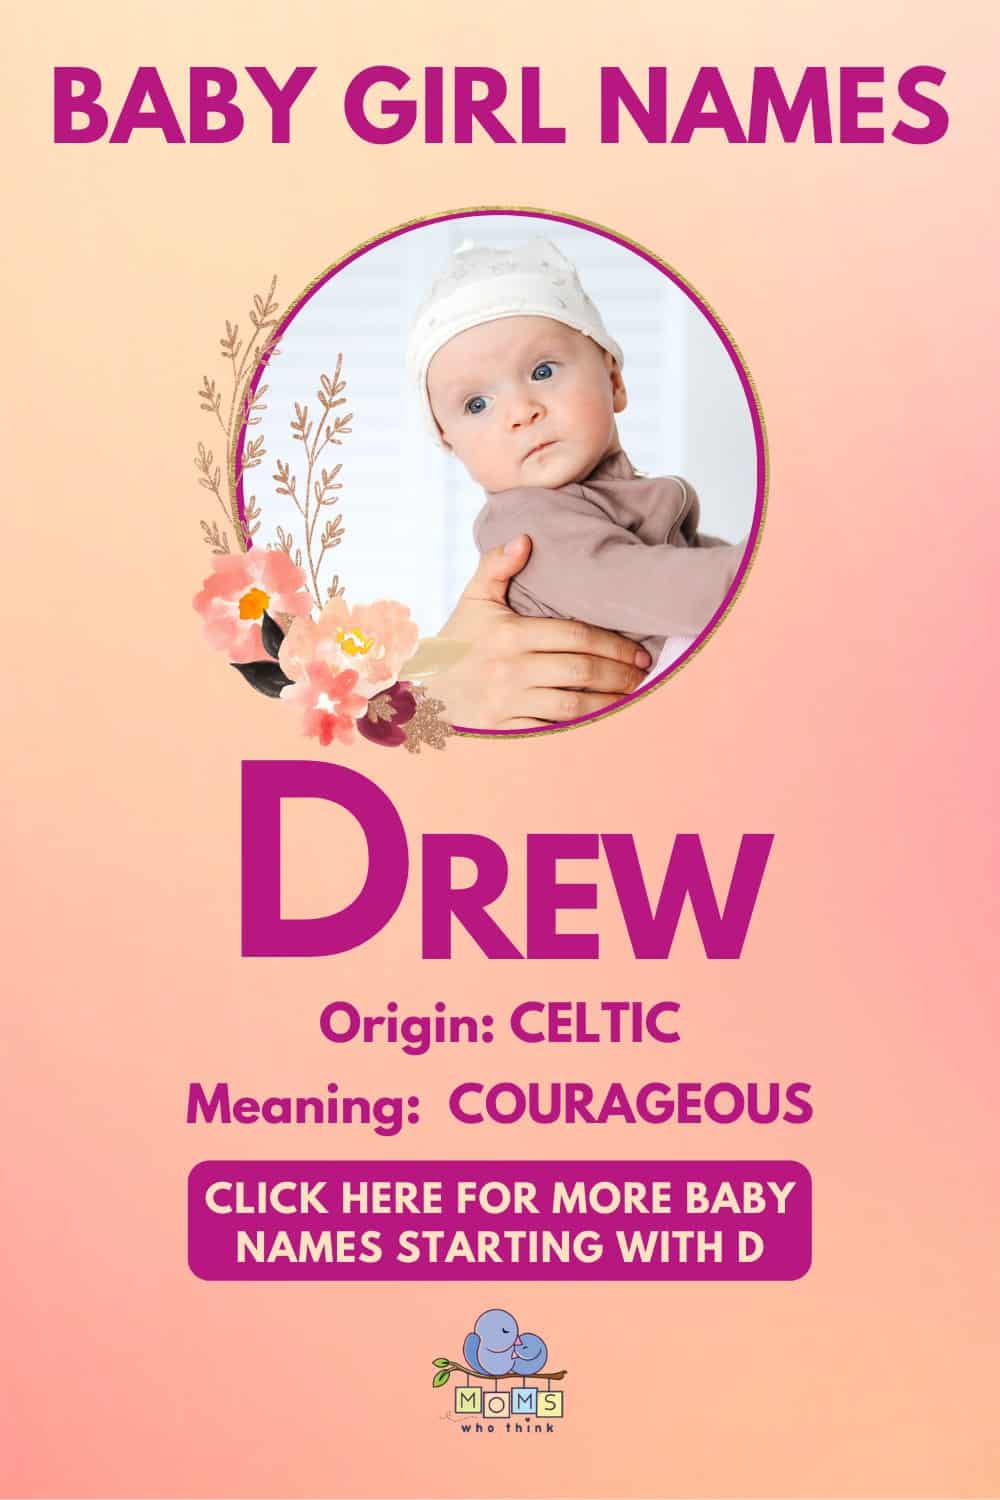 Baby girl name meanings - Drew